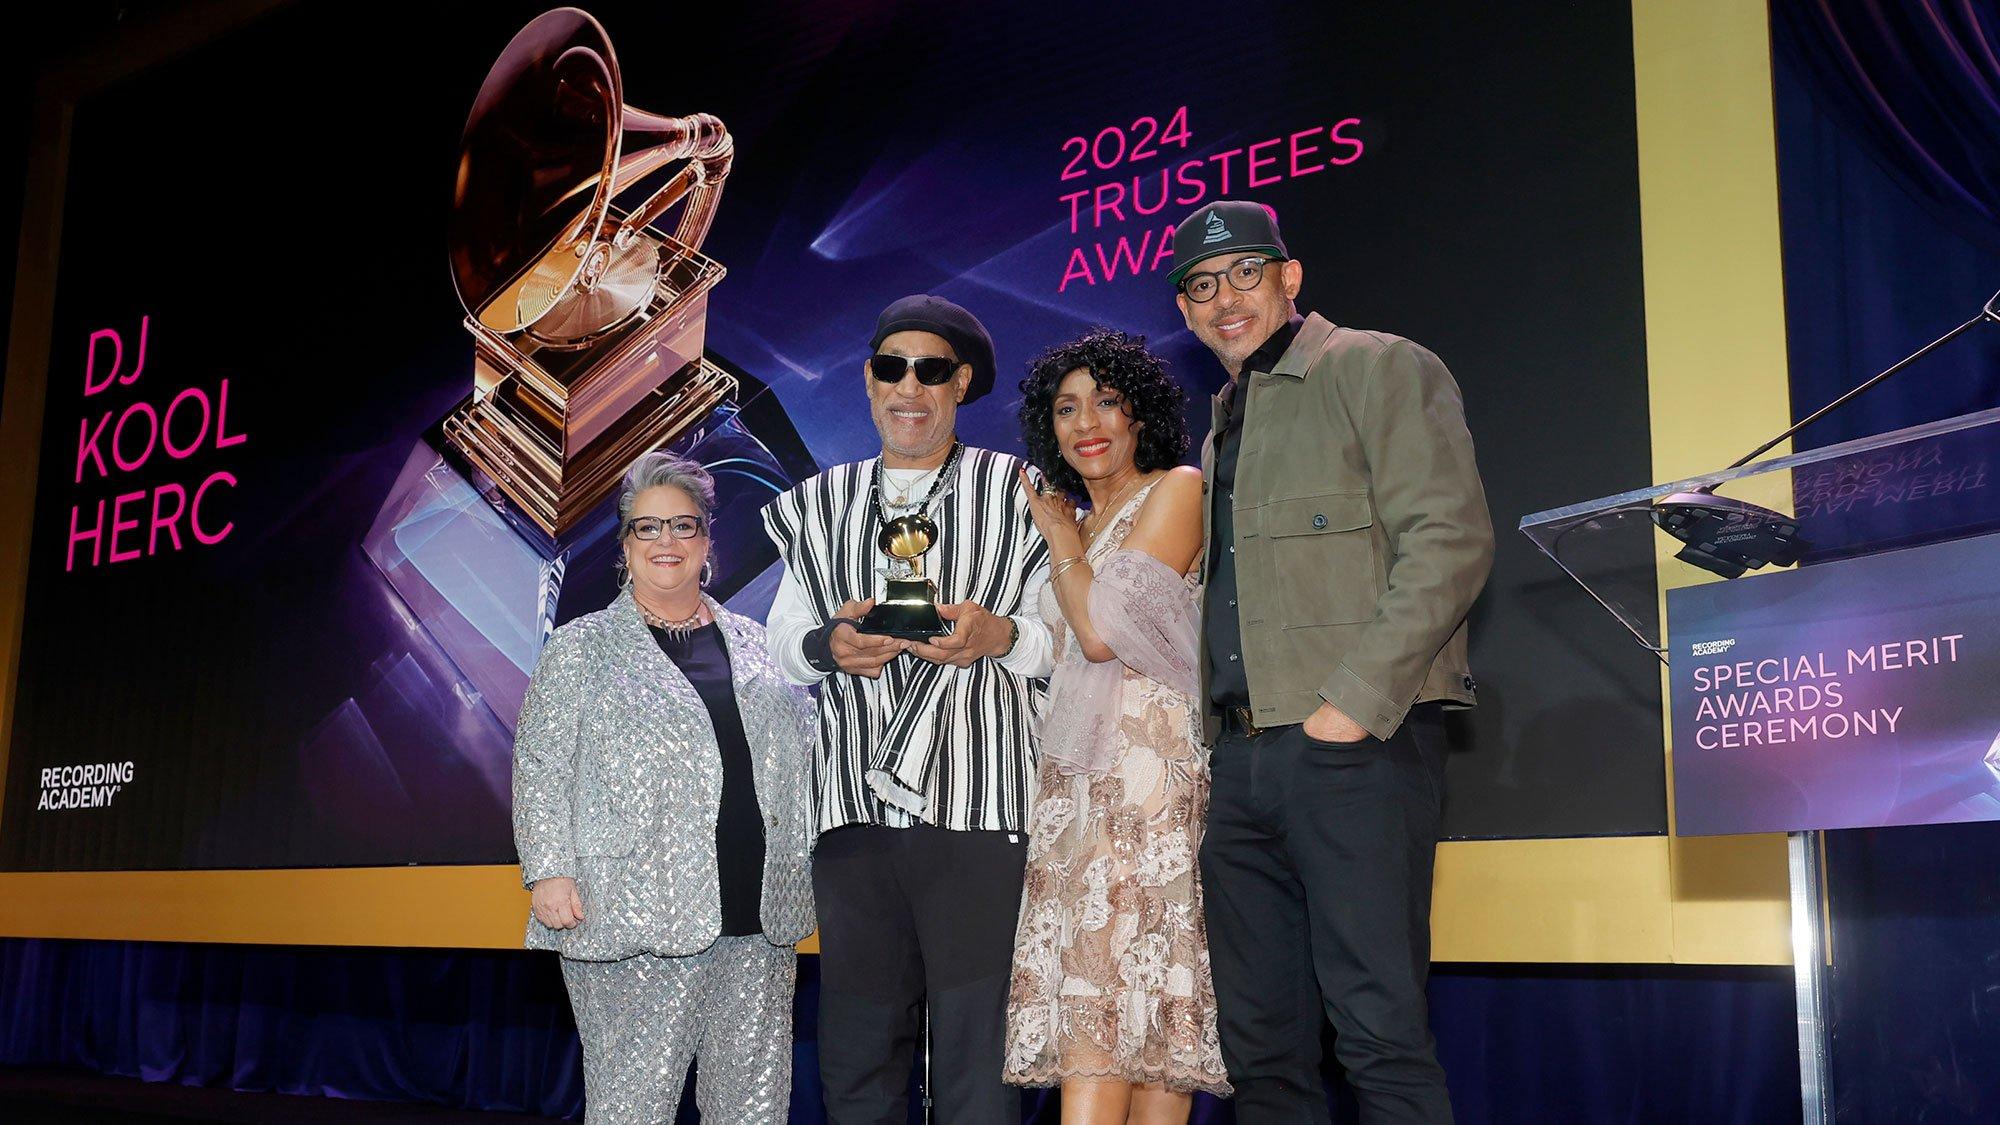 Chair of the Recording Academy's Board of Trustees Tammy Hurt, Trustees Honoree Award Honoree DJ Kool Herc, Cindy Campbell and CEO of the Recording Academy and Musicares Harvey Mason Jr.